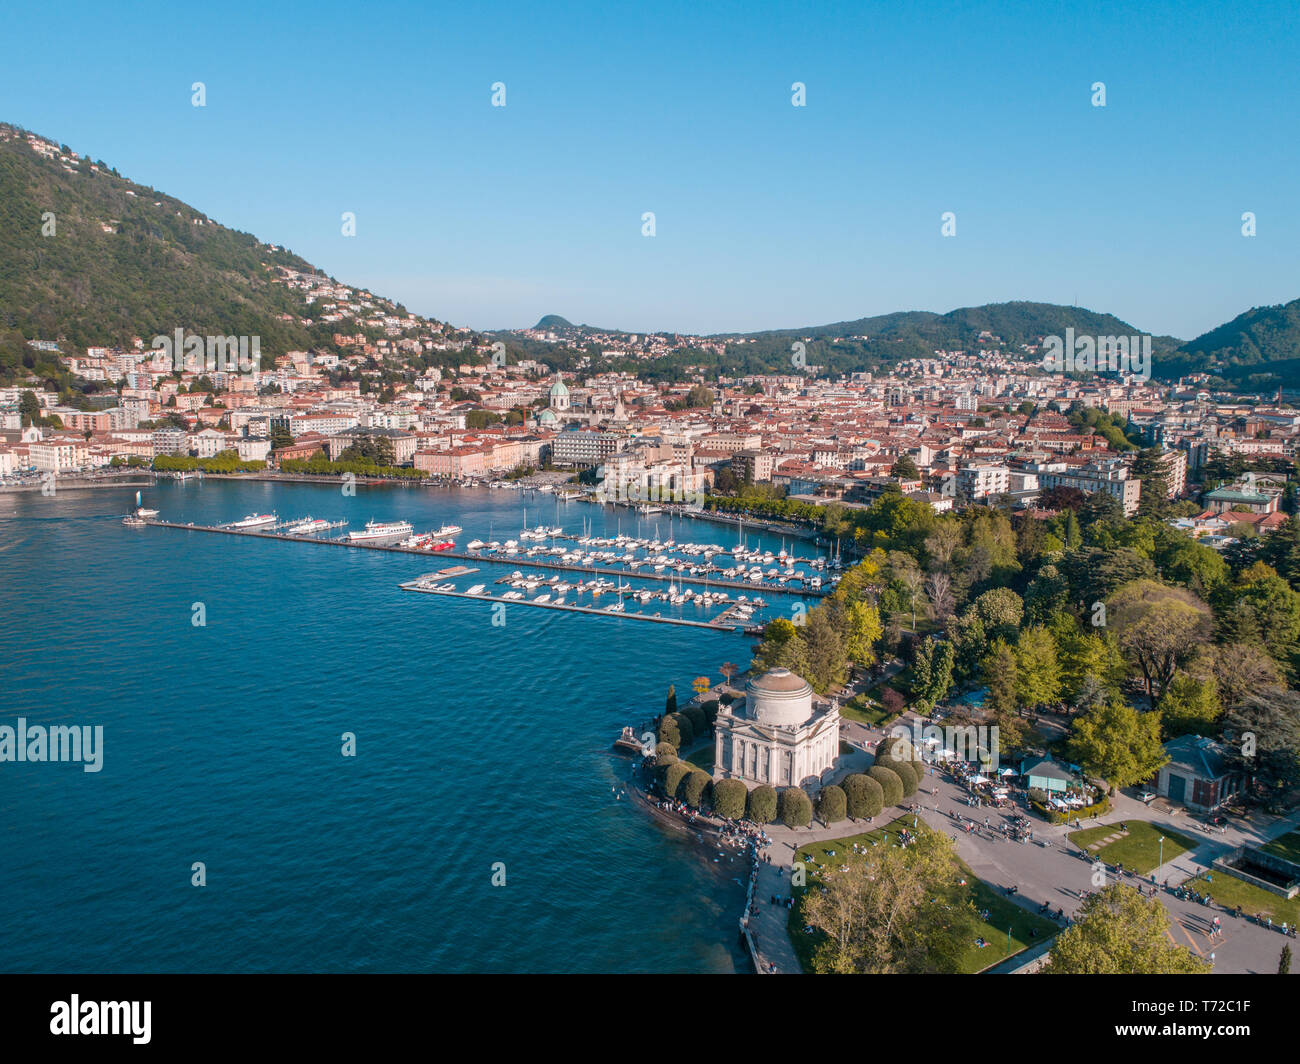 Volta temple and the city of Como. Holidays on Como lake in Europe Stock Photo